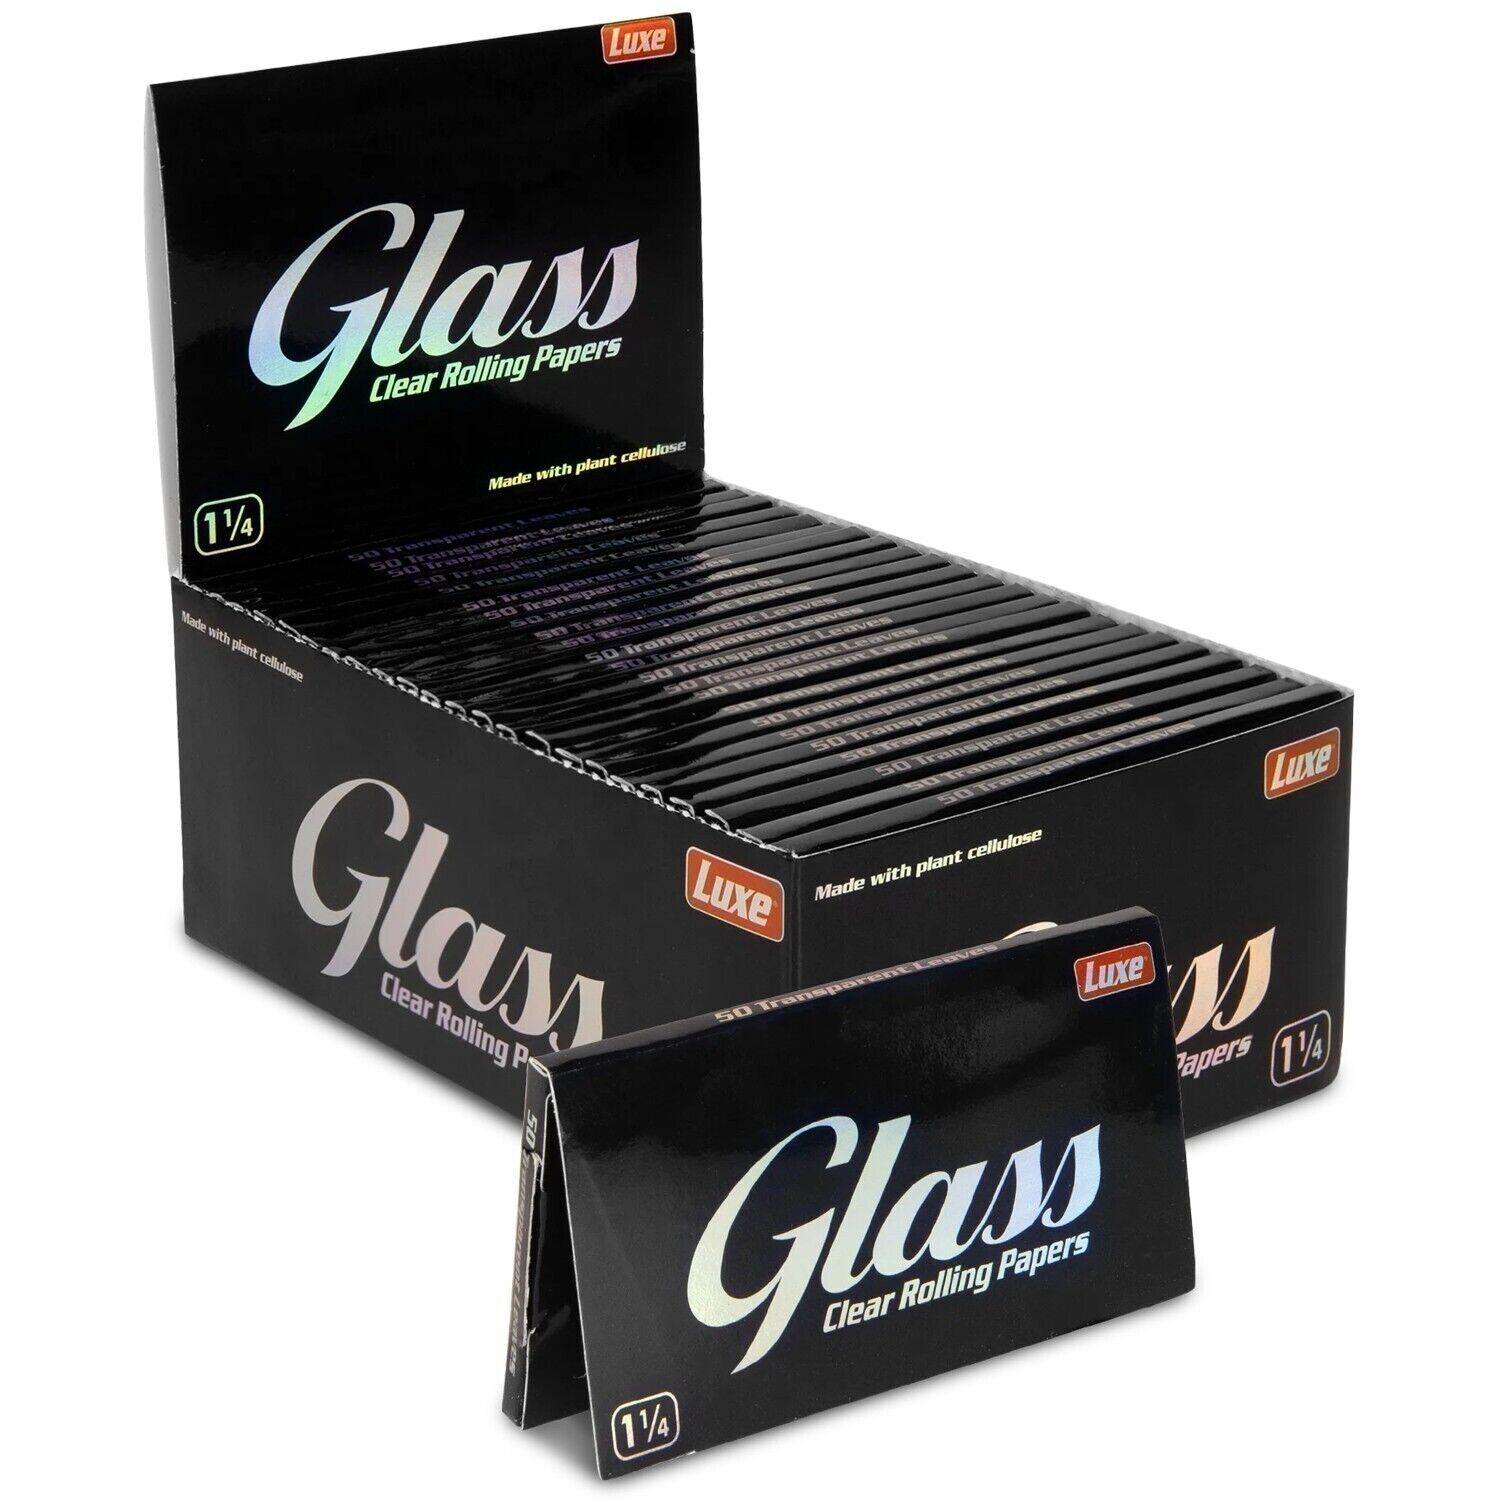 FULL BOX GLASS 1 1/4 CLEAR CELLULOSE Cigarette rolling papers - 24 Pack